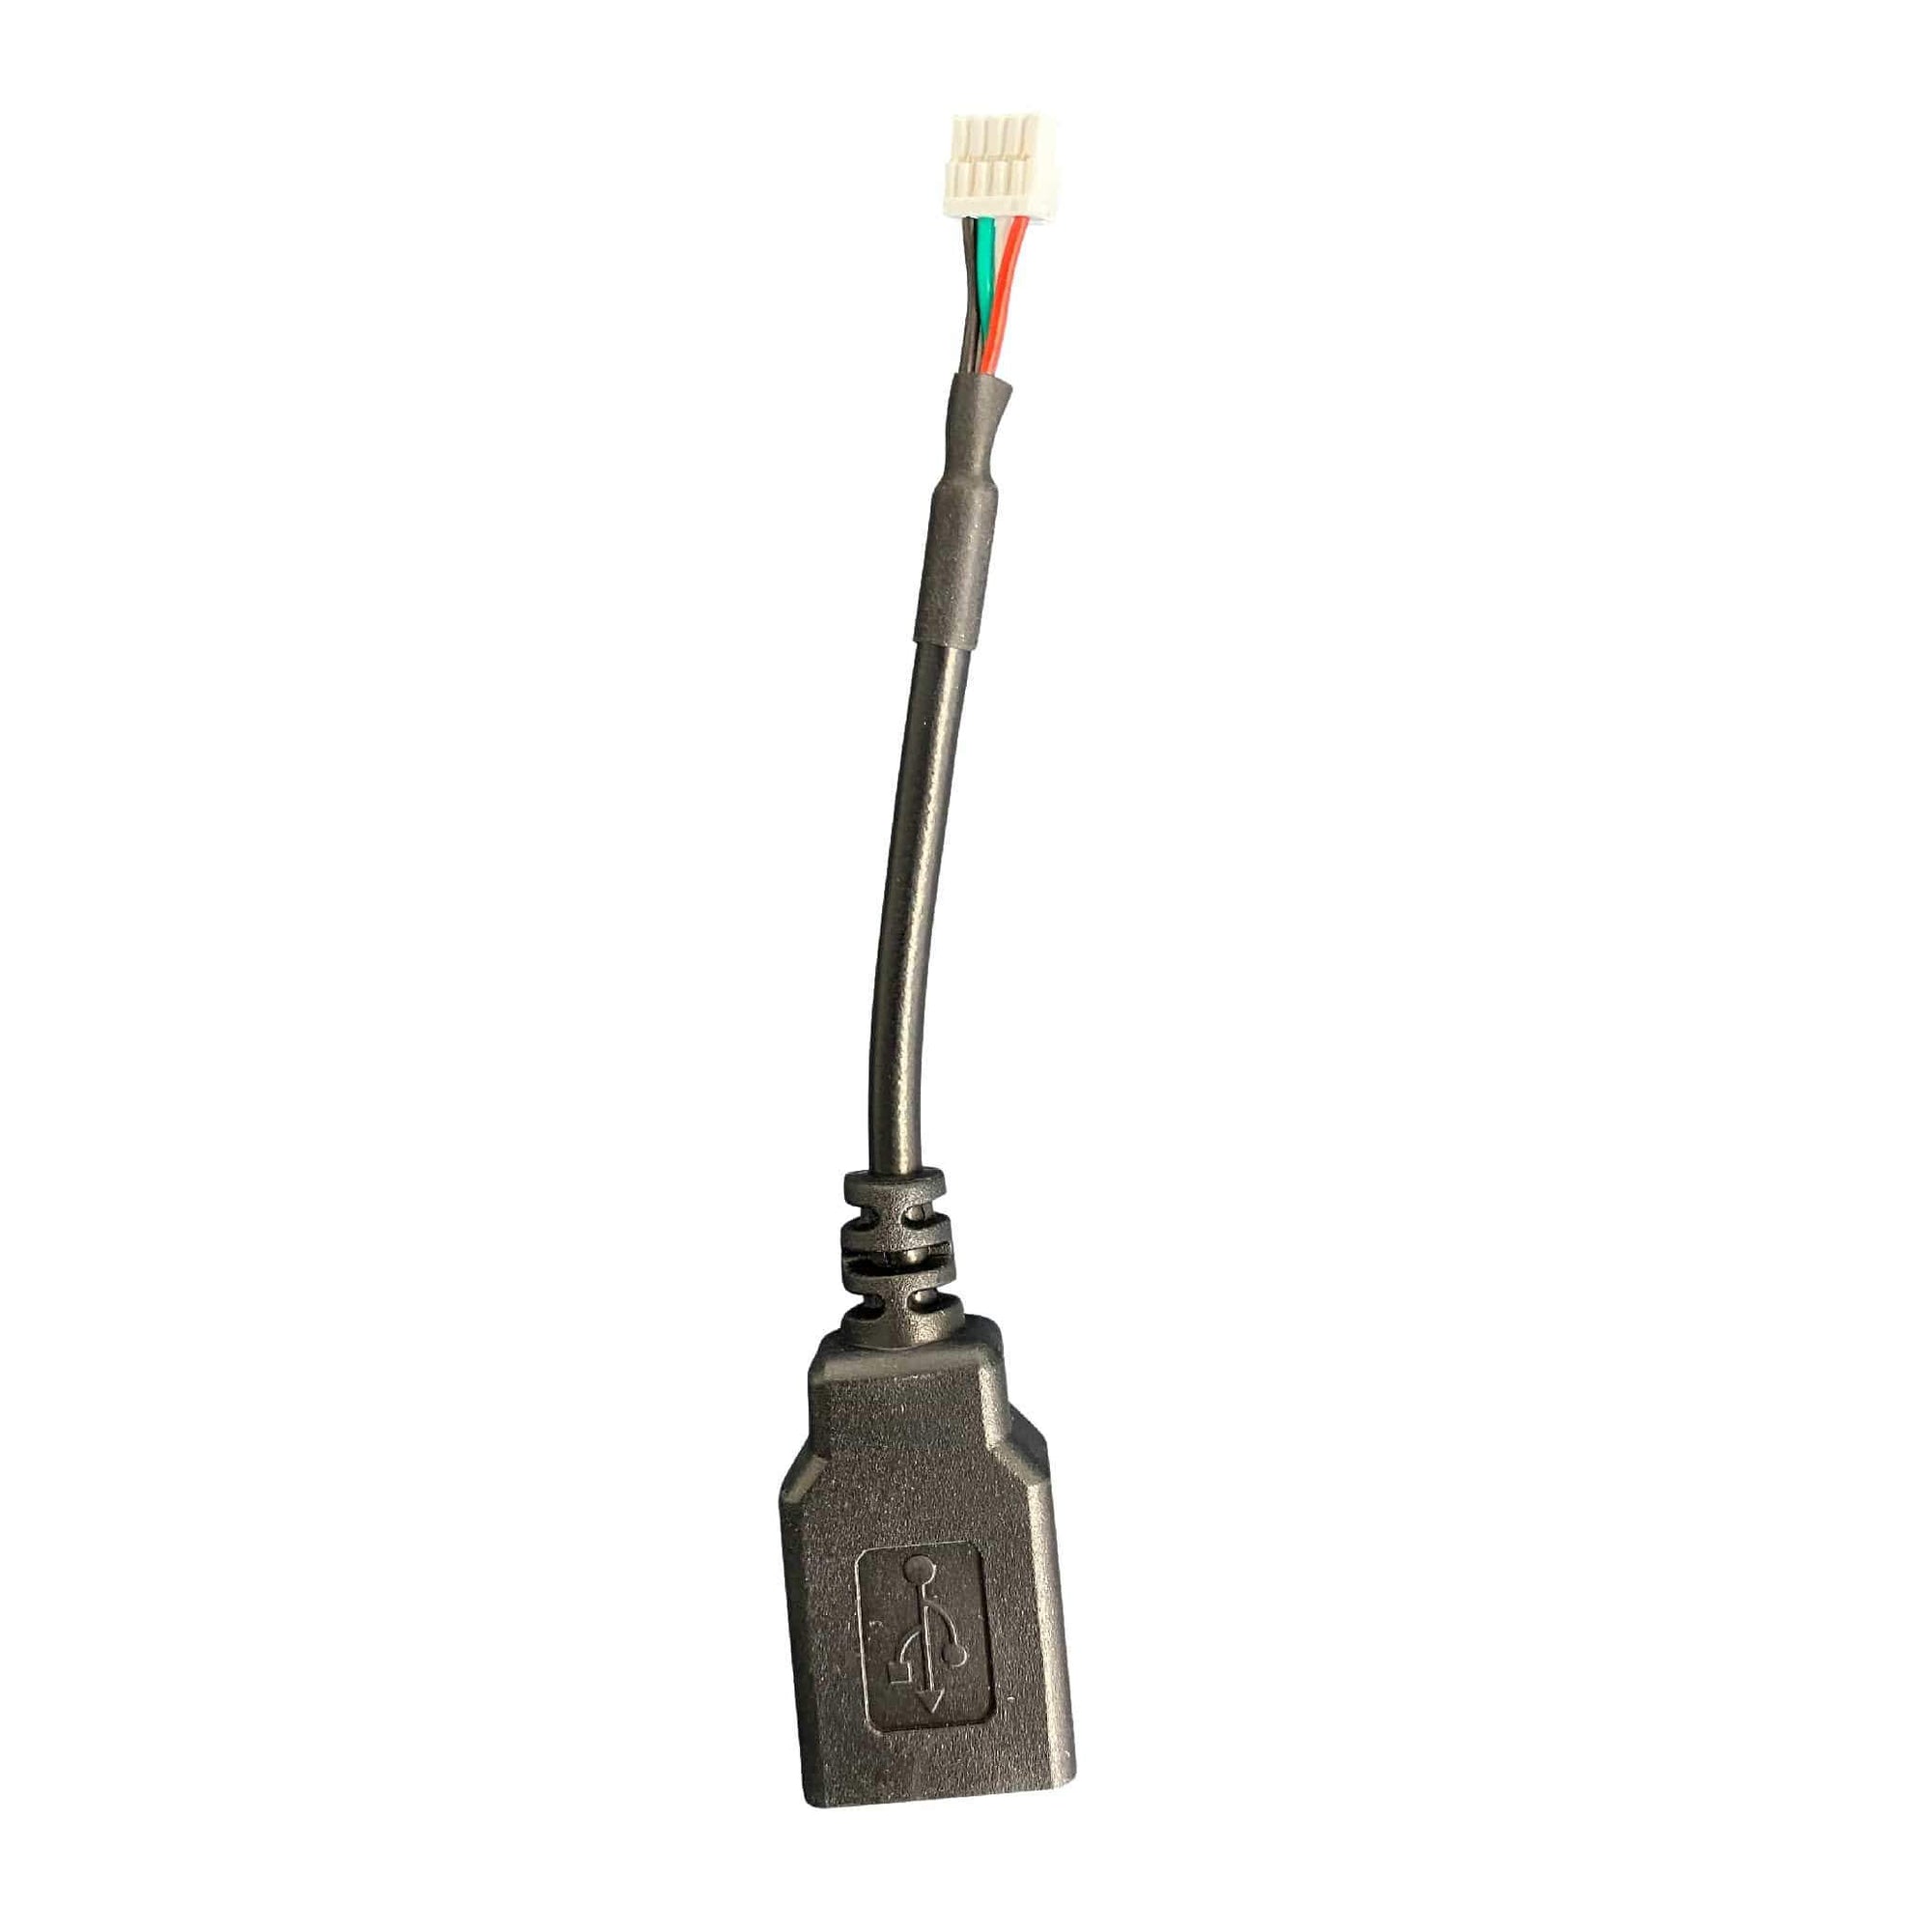 Cable 4-pin JST to 2.0 Type A Female (MCBL-00009-1) ModalAI, Inc.